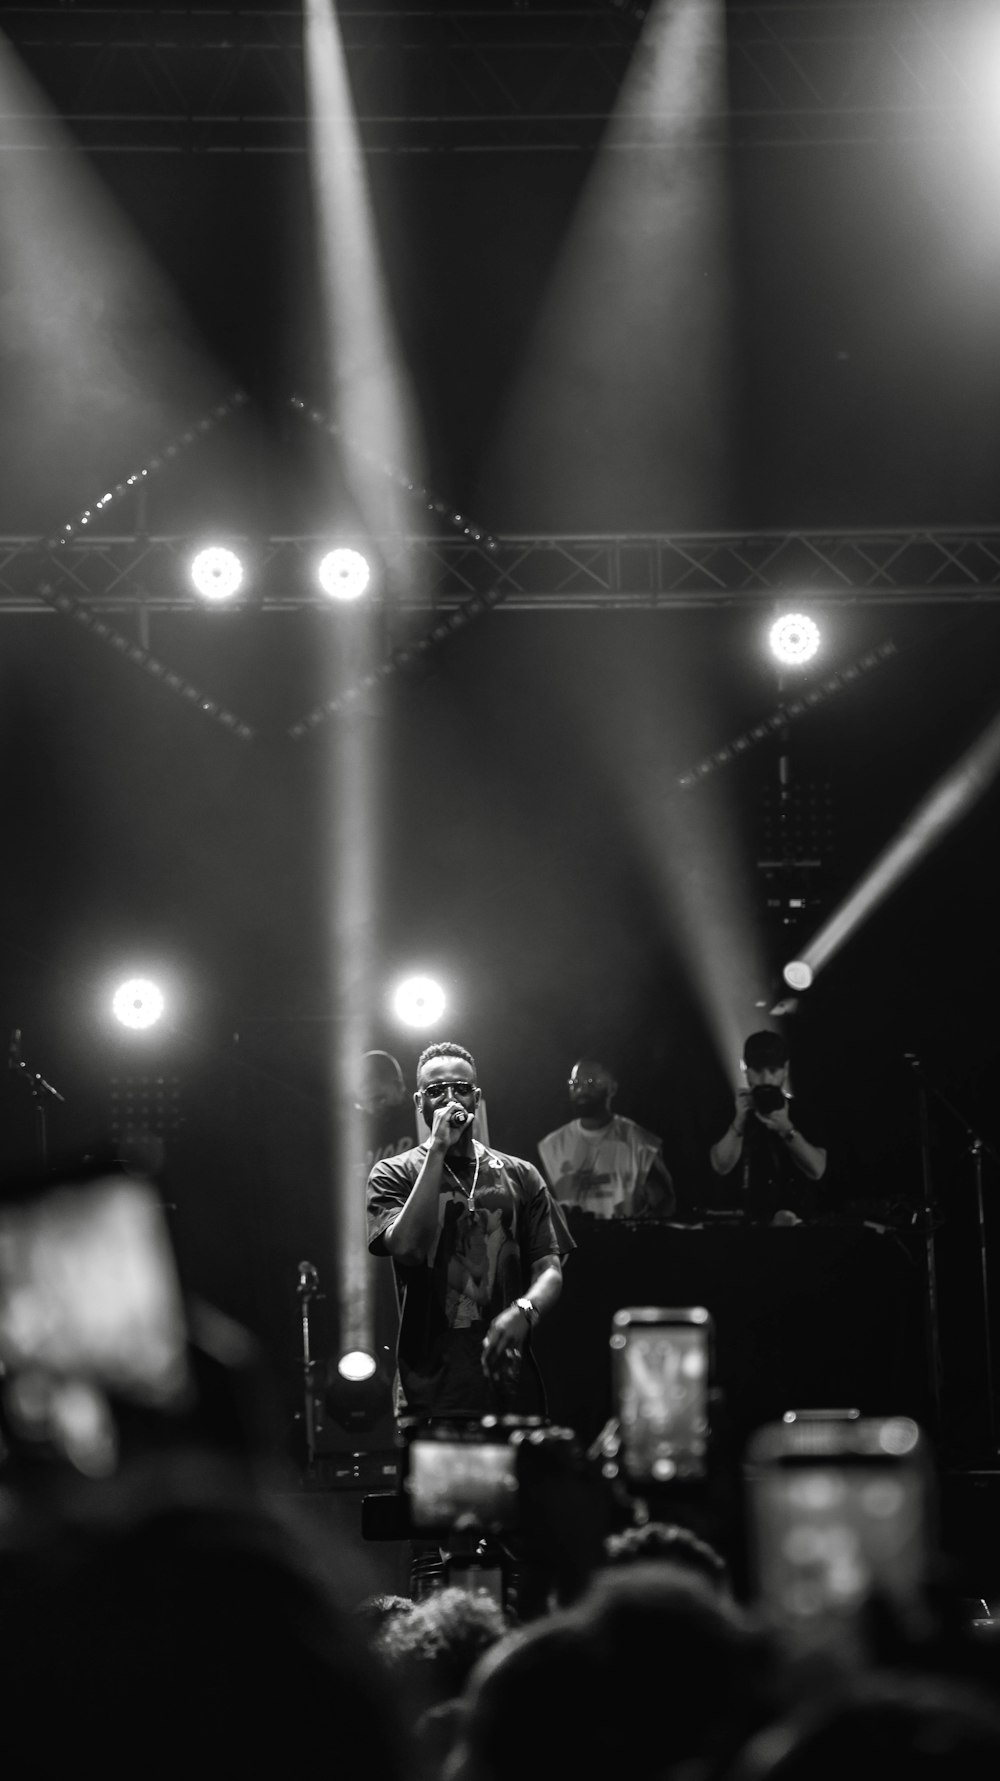 grayscale photography of man holding microphone on stage